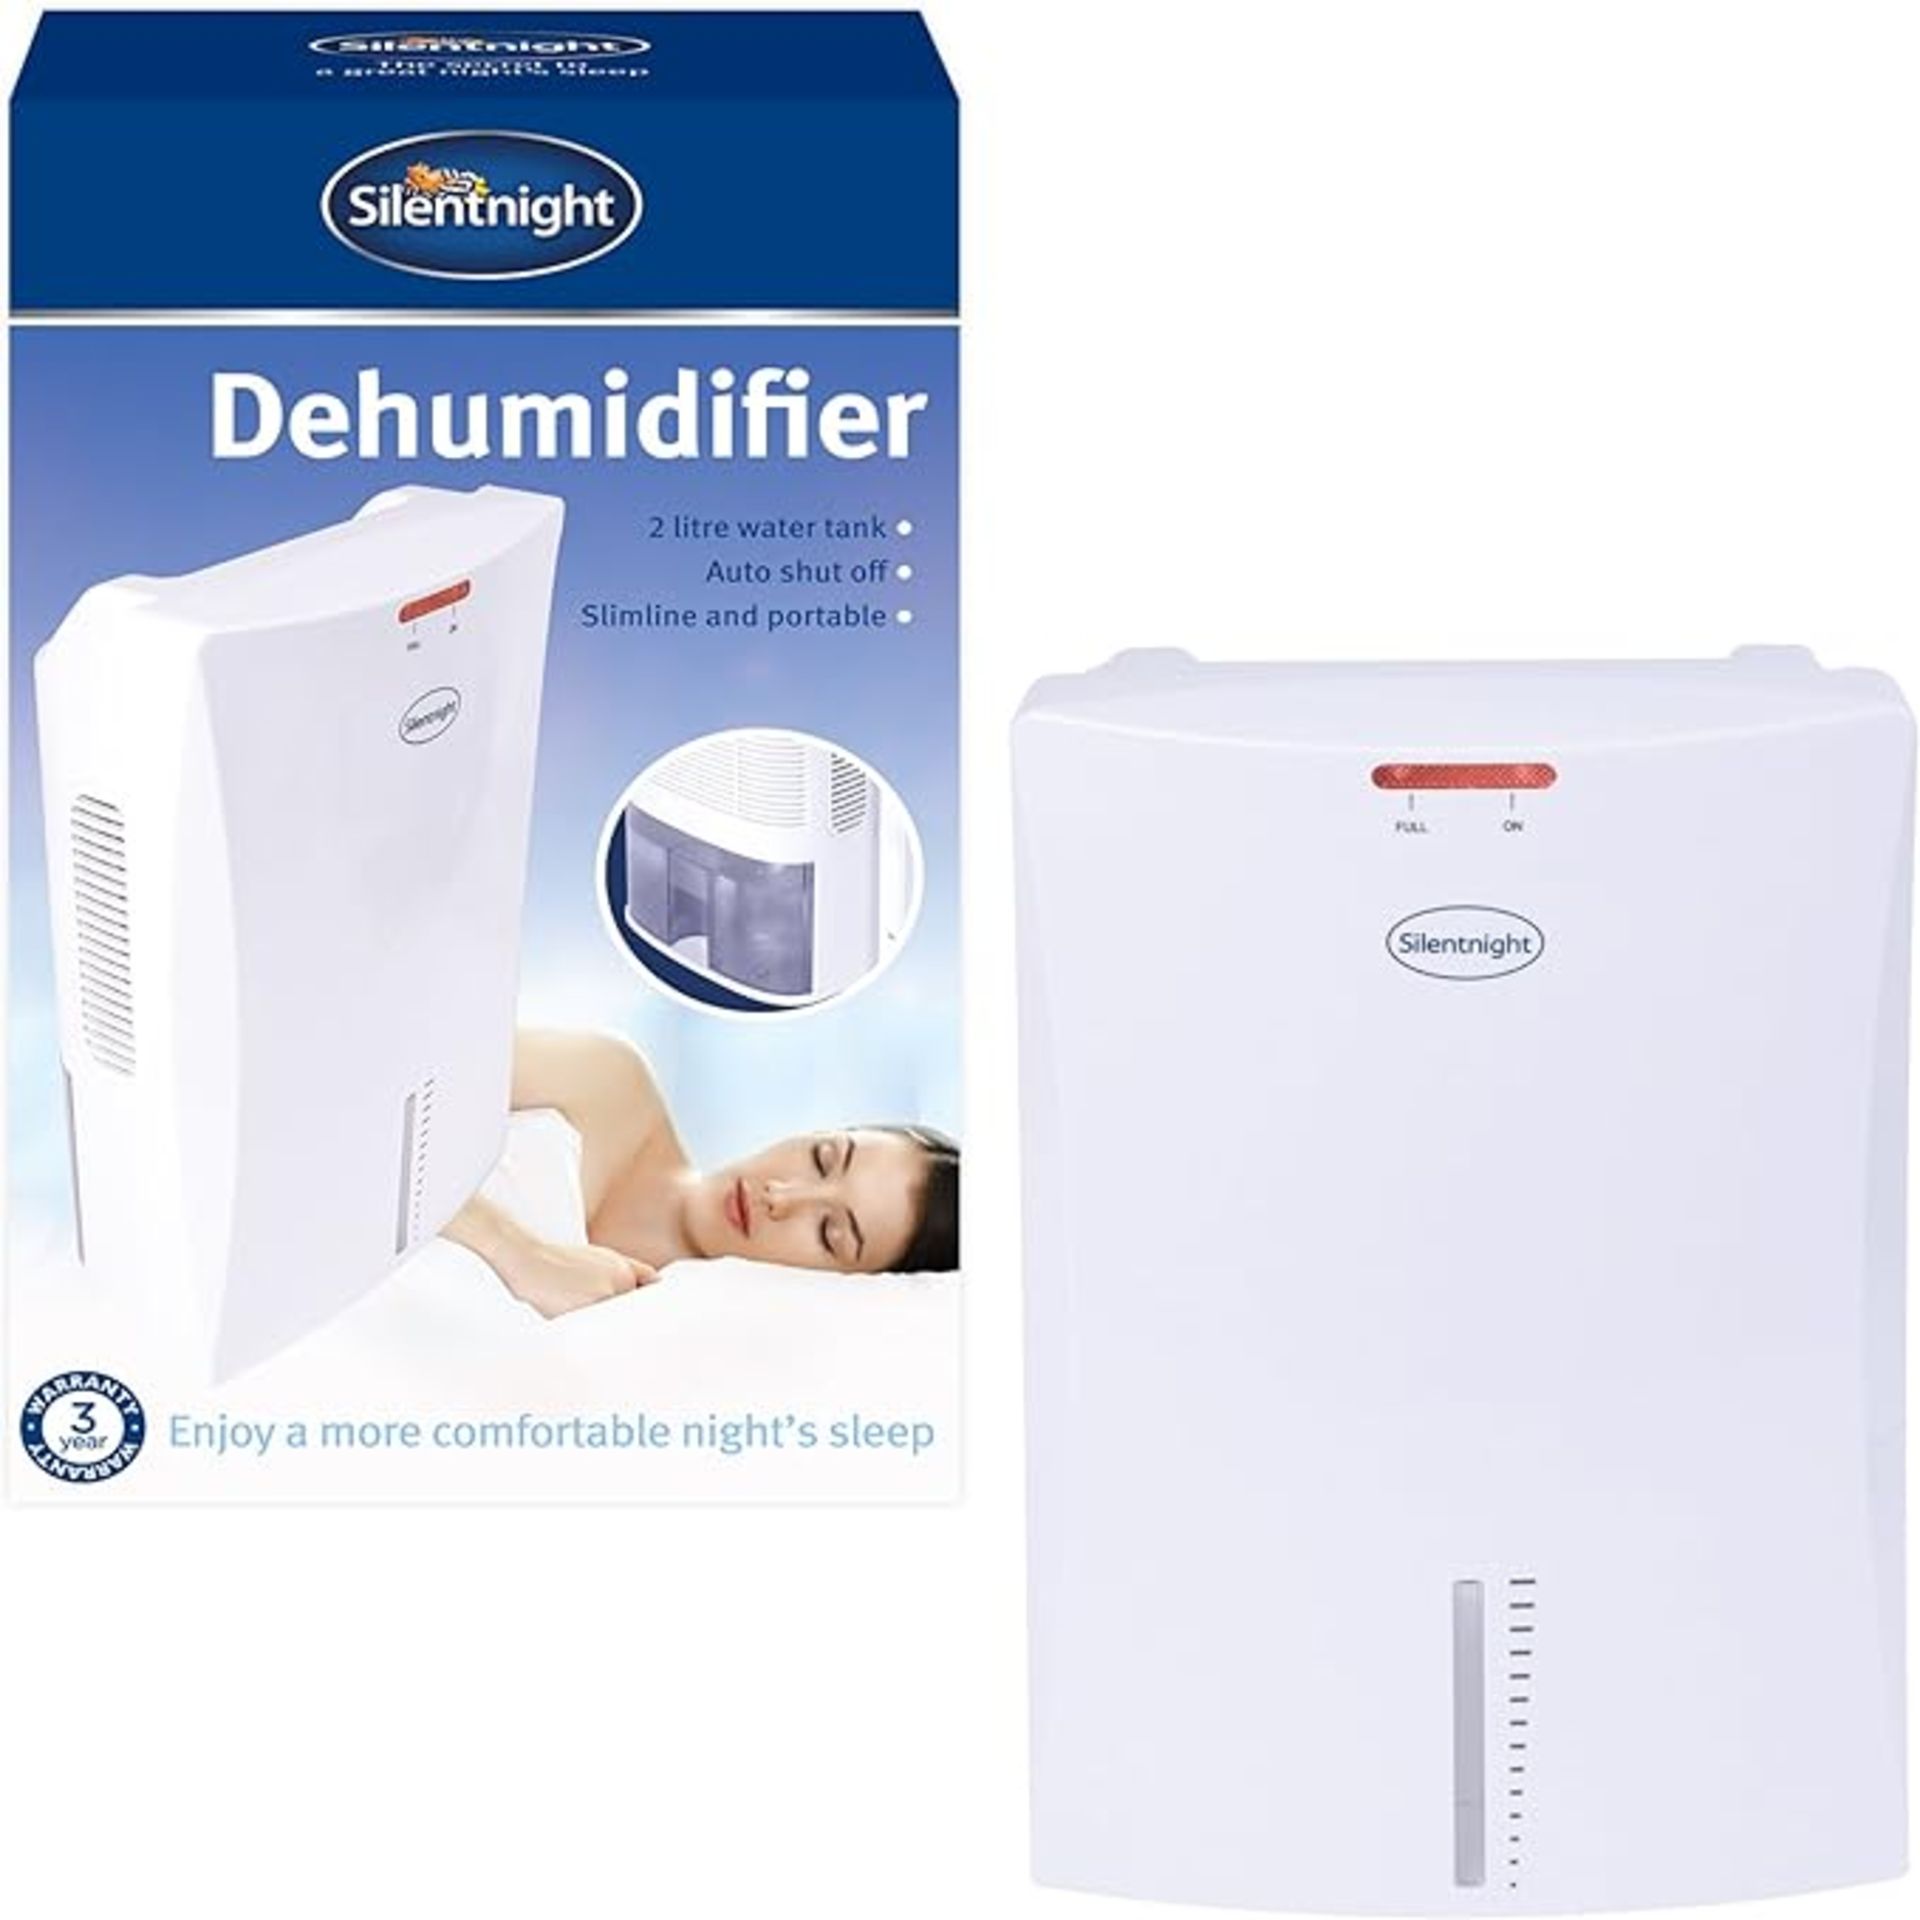 Silentnight 38040 Thermoelectric Dehumidifier 600ml / Auto Shut Off / 2L Water Tank/Slimline and